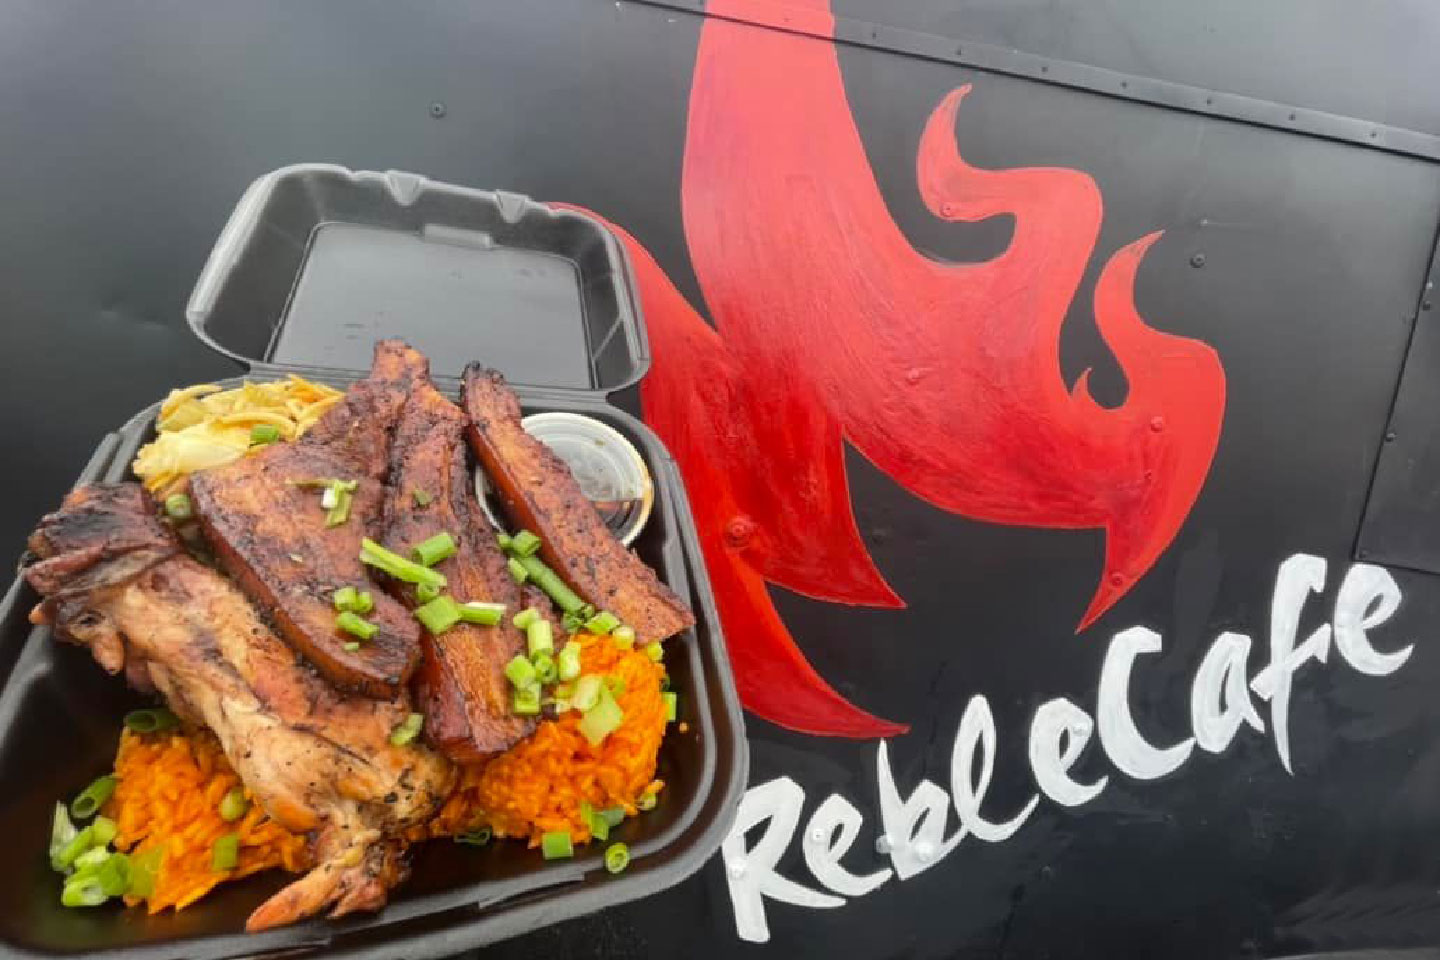 No Slogan, Just Great Food. Mobile food trailer cooking up Island flavors and serving the iconic sushi burrito. Proudly serving the Colorado Springs area.
https://www.facebook.com/RebleCafe